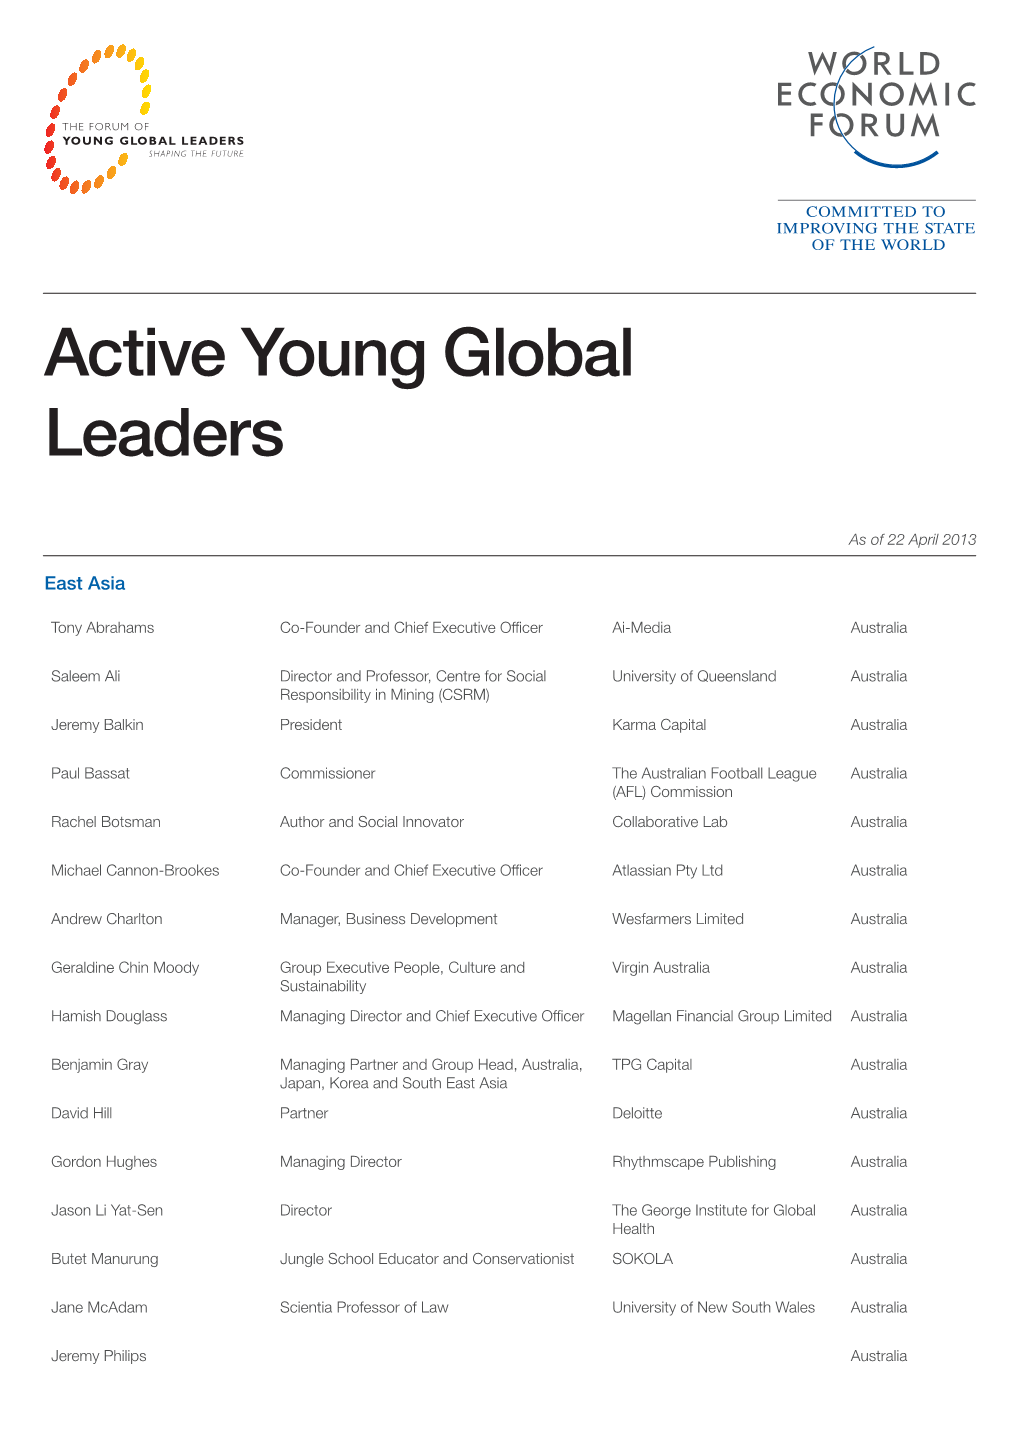 Active Young Global Leaders